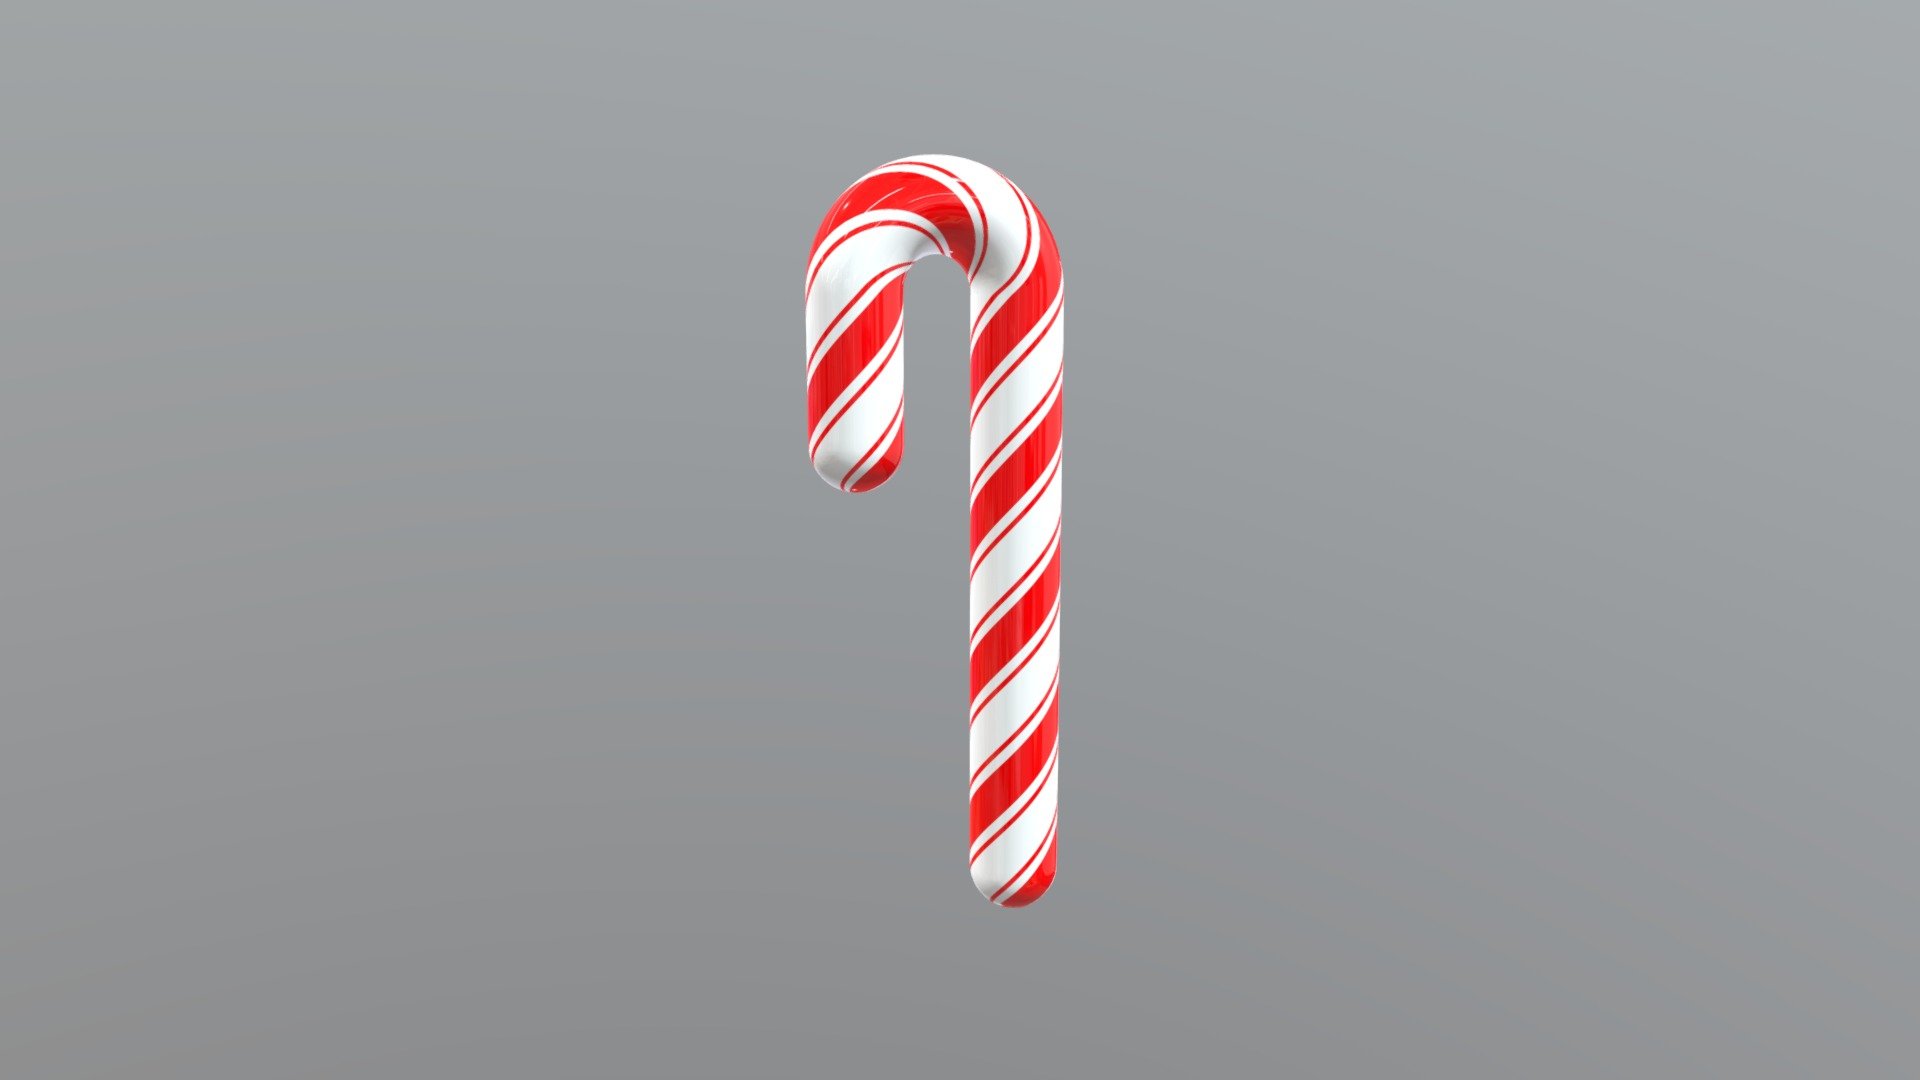 Candy Cane (Christmas sweet). 3D model + diffuse texture - Candy Cane (Christmas sweet) - Buy Royalty Free 3D model by Maksim Ziabkin (@maksim.ziabkin) 3d model